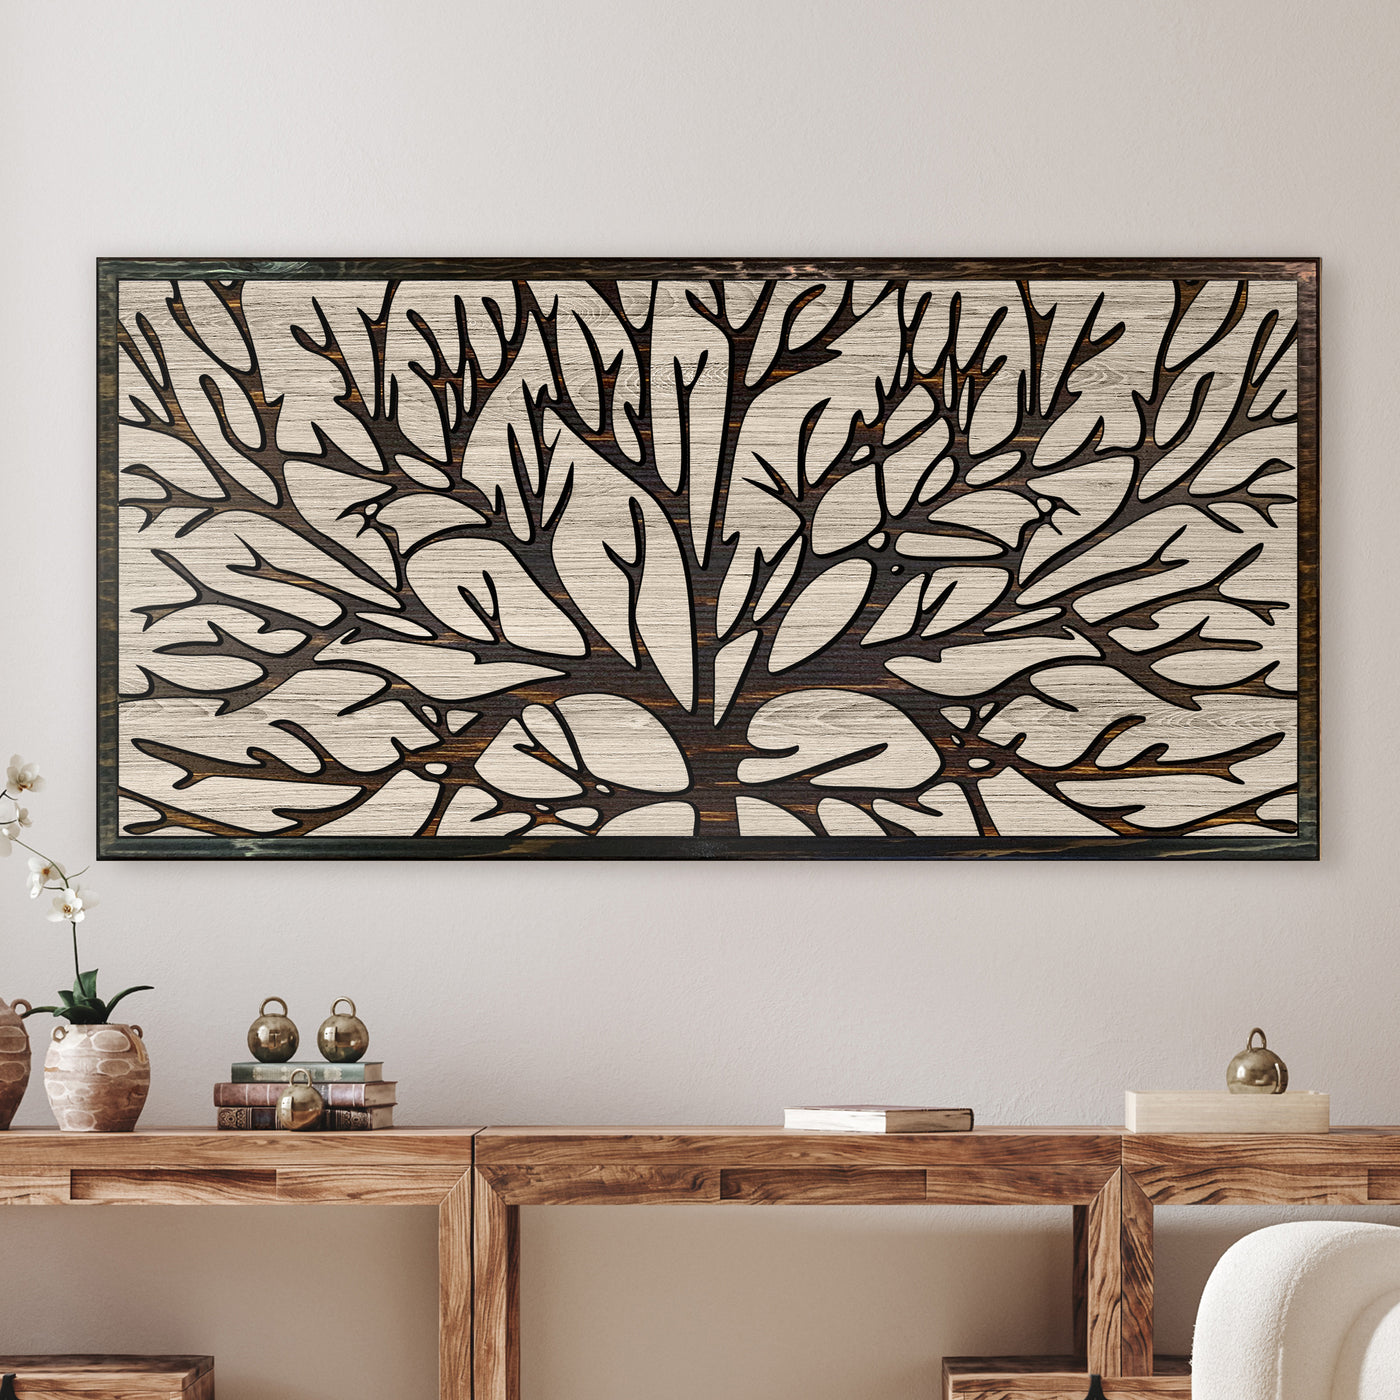 Custom carved abstract tree branch wood wall art that is handmade in the US